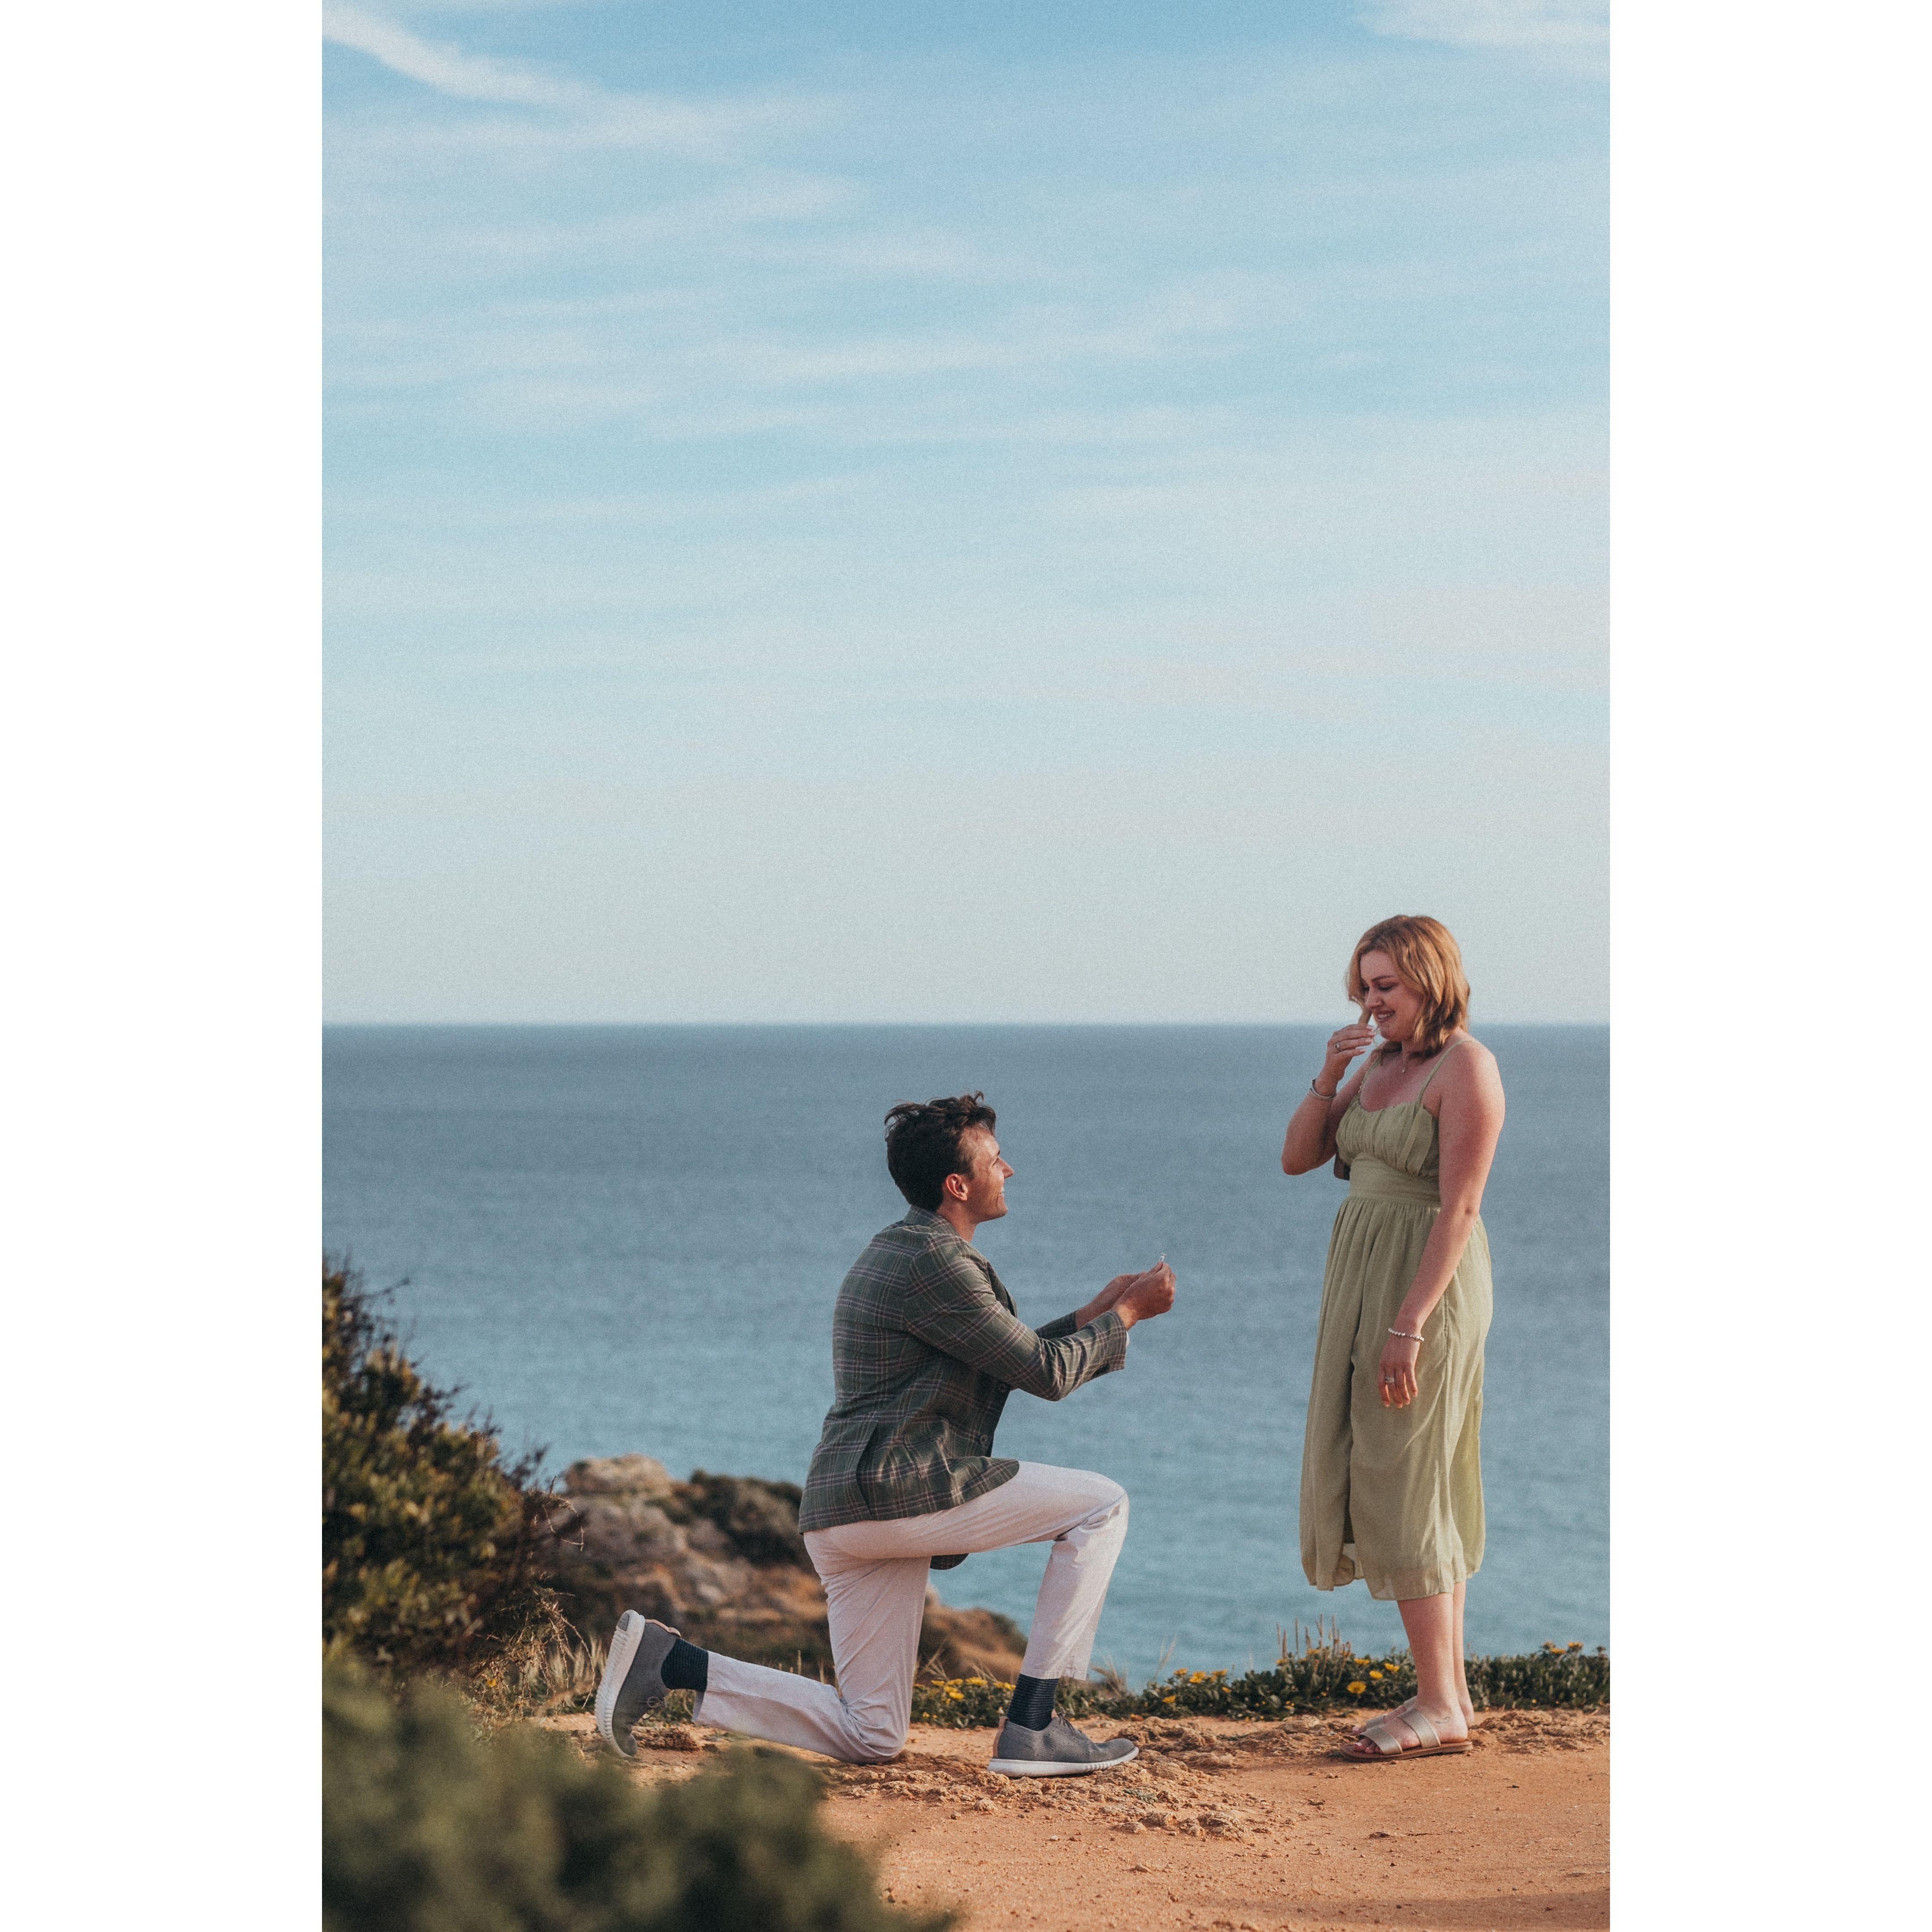 Our proposal in Lagos, Portugal - April 9, 2024